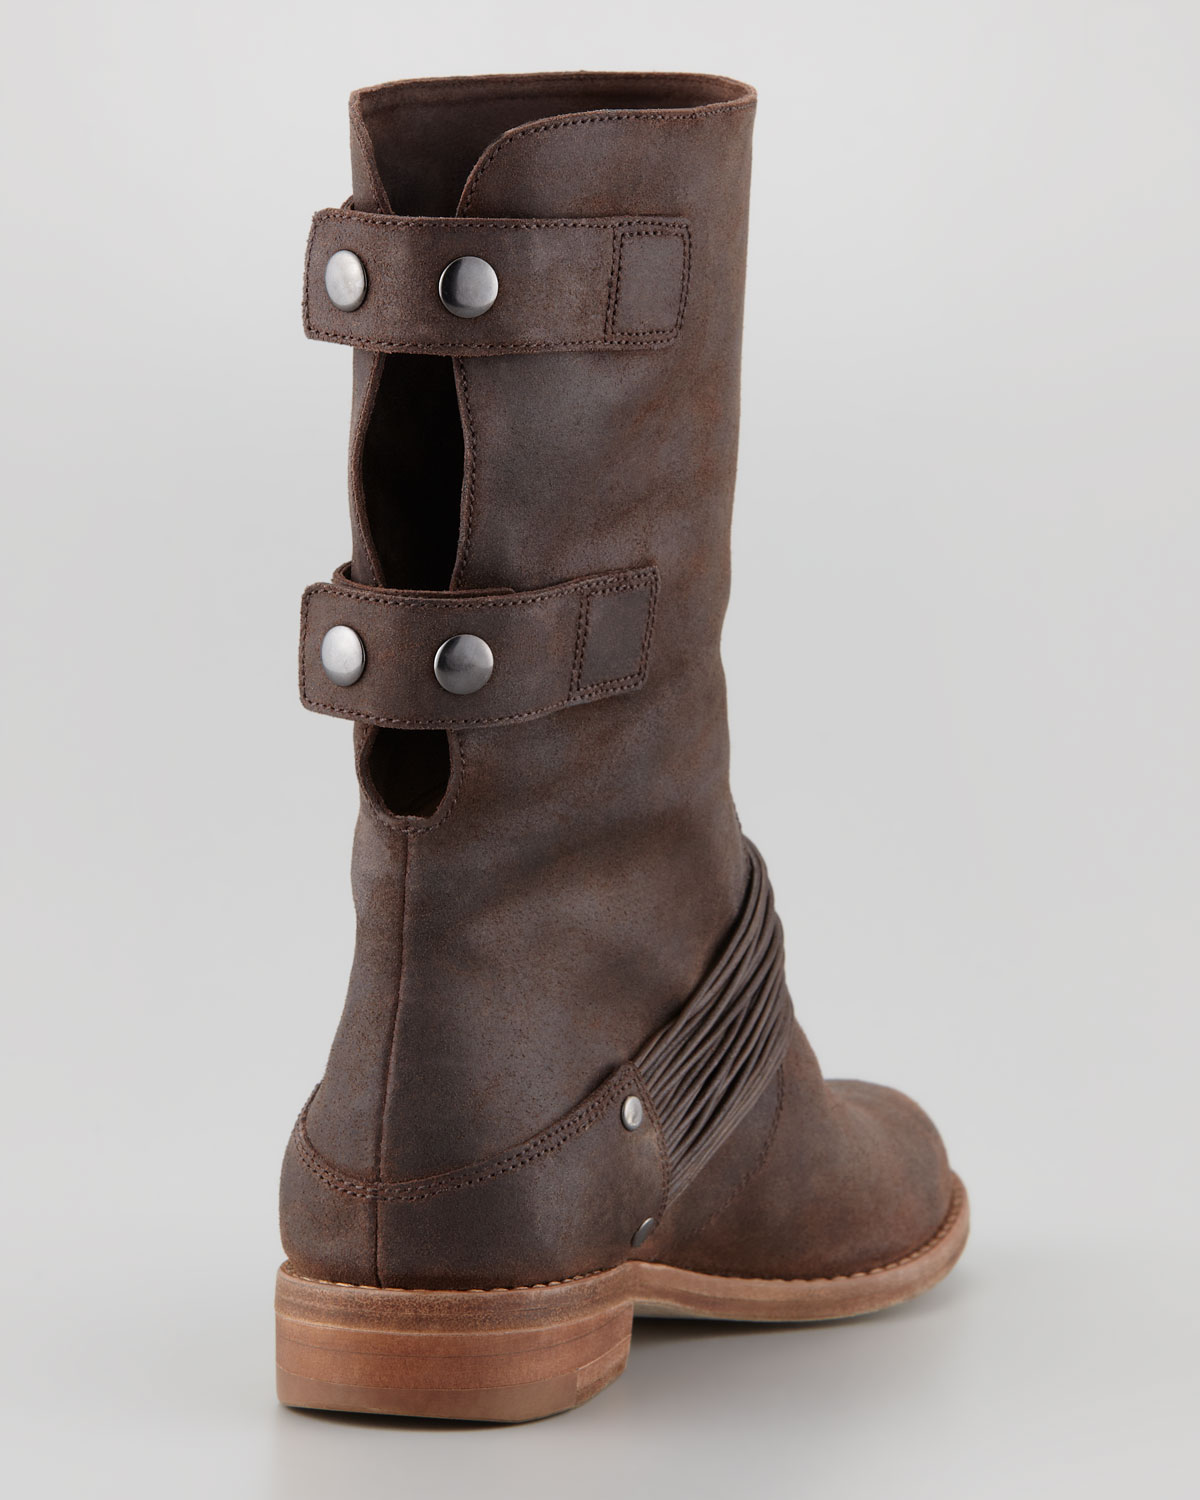 Eileen fisher Snap Convertible Leather Boot Timber in